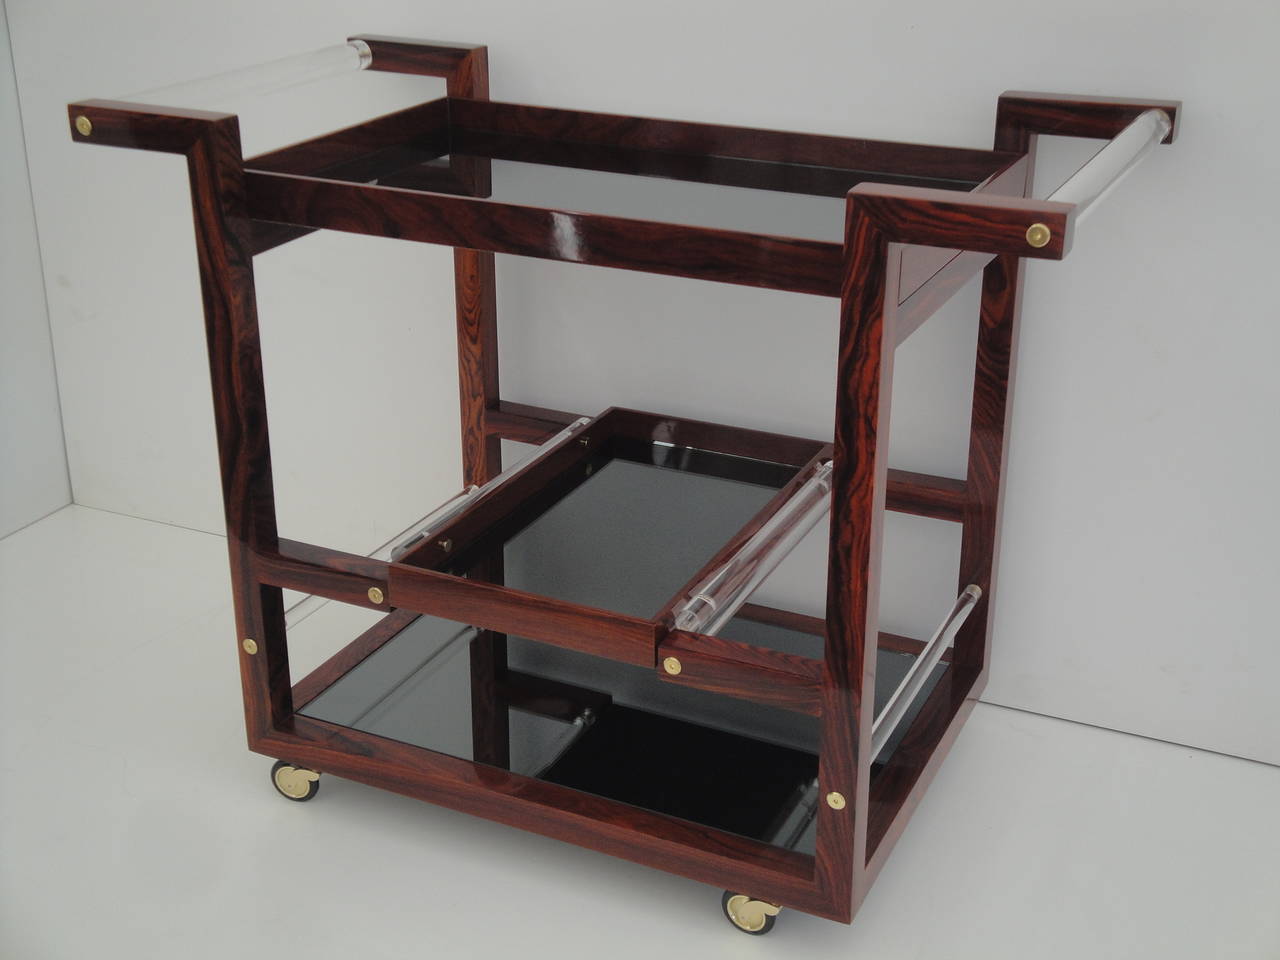 Gorgeous Art Deco style solid rosewood rolling bar cart with Lucite handles and smoke grey mirror shelves and removable tray.